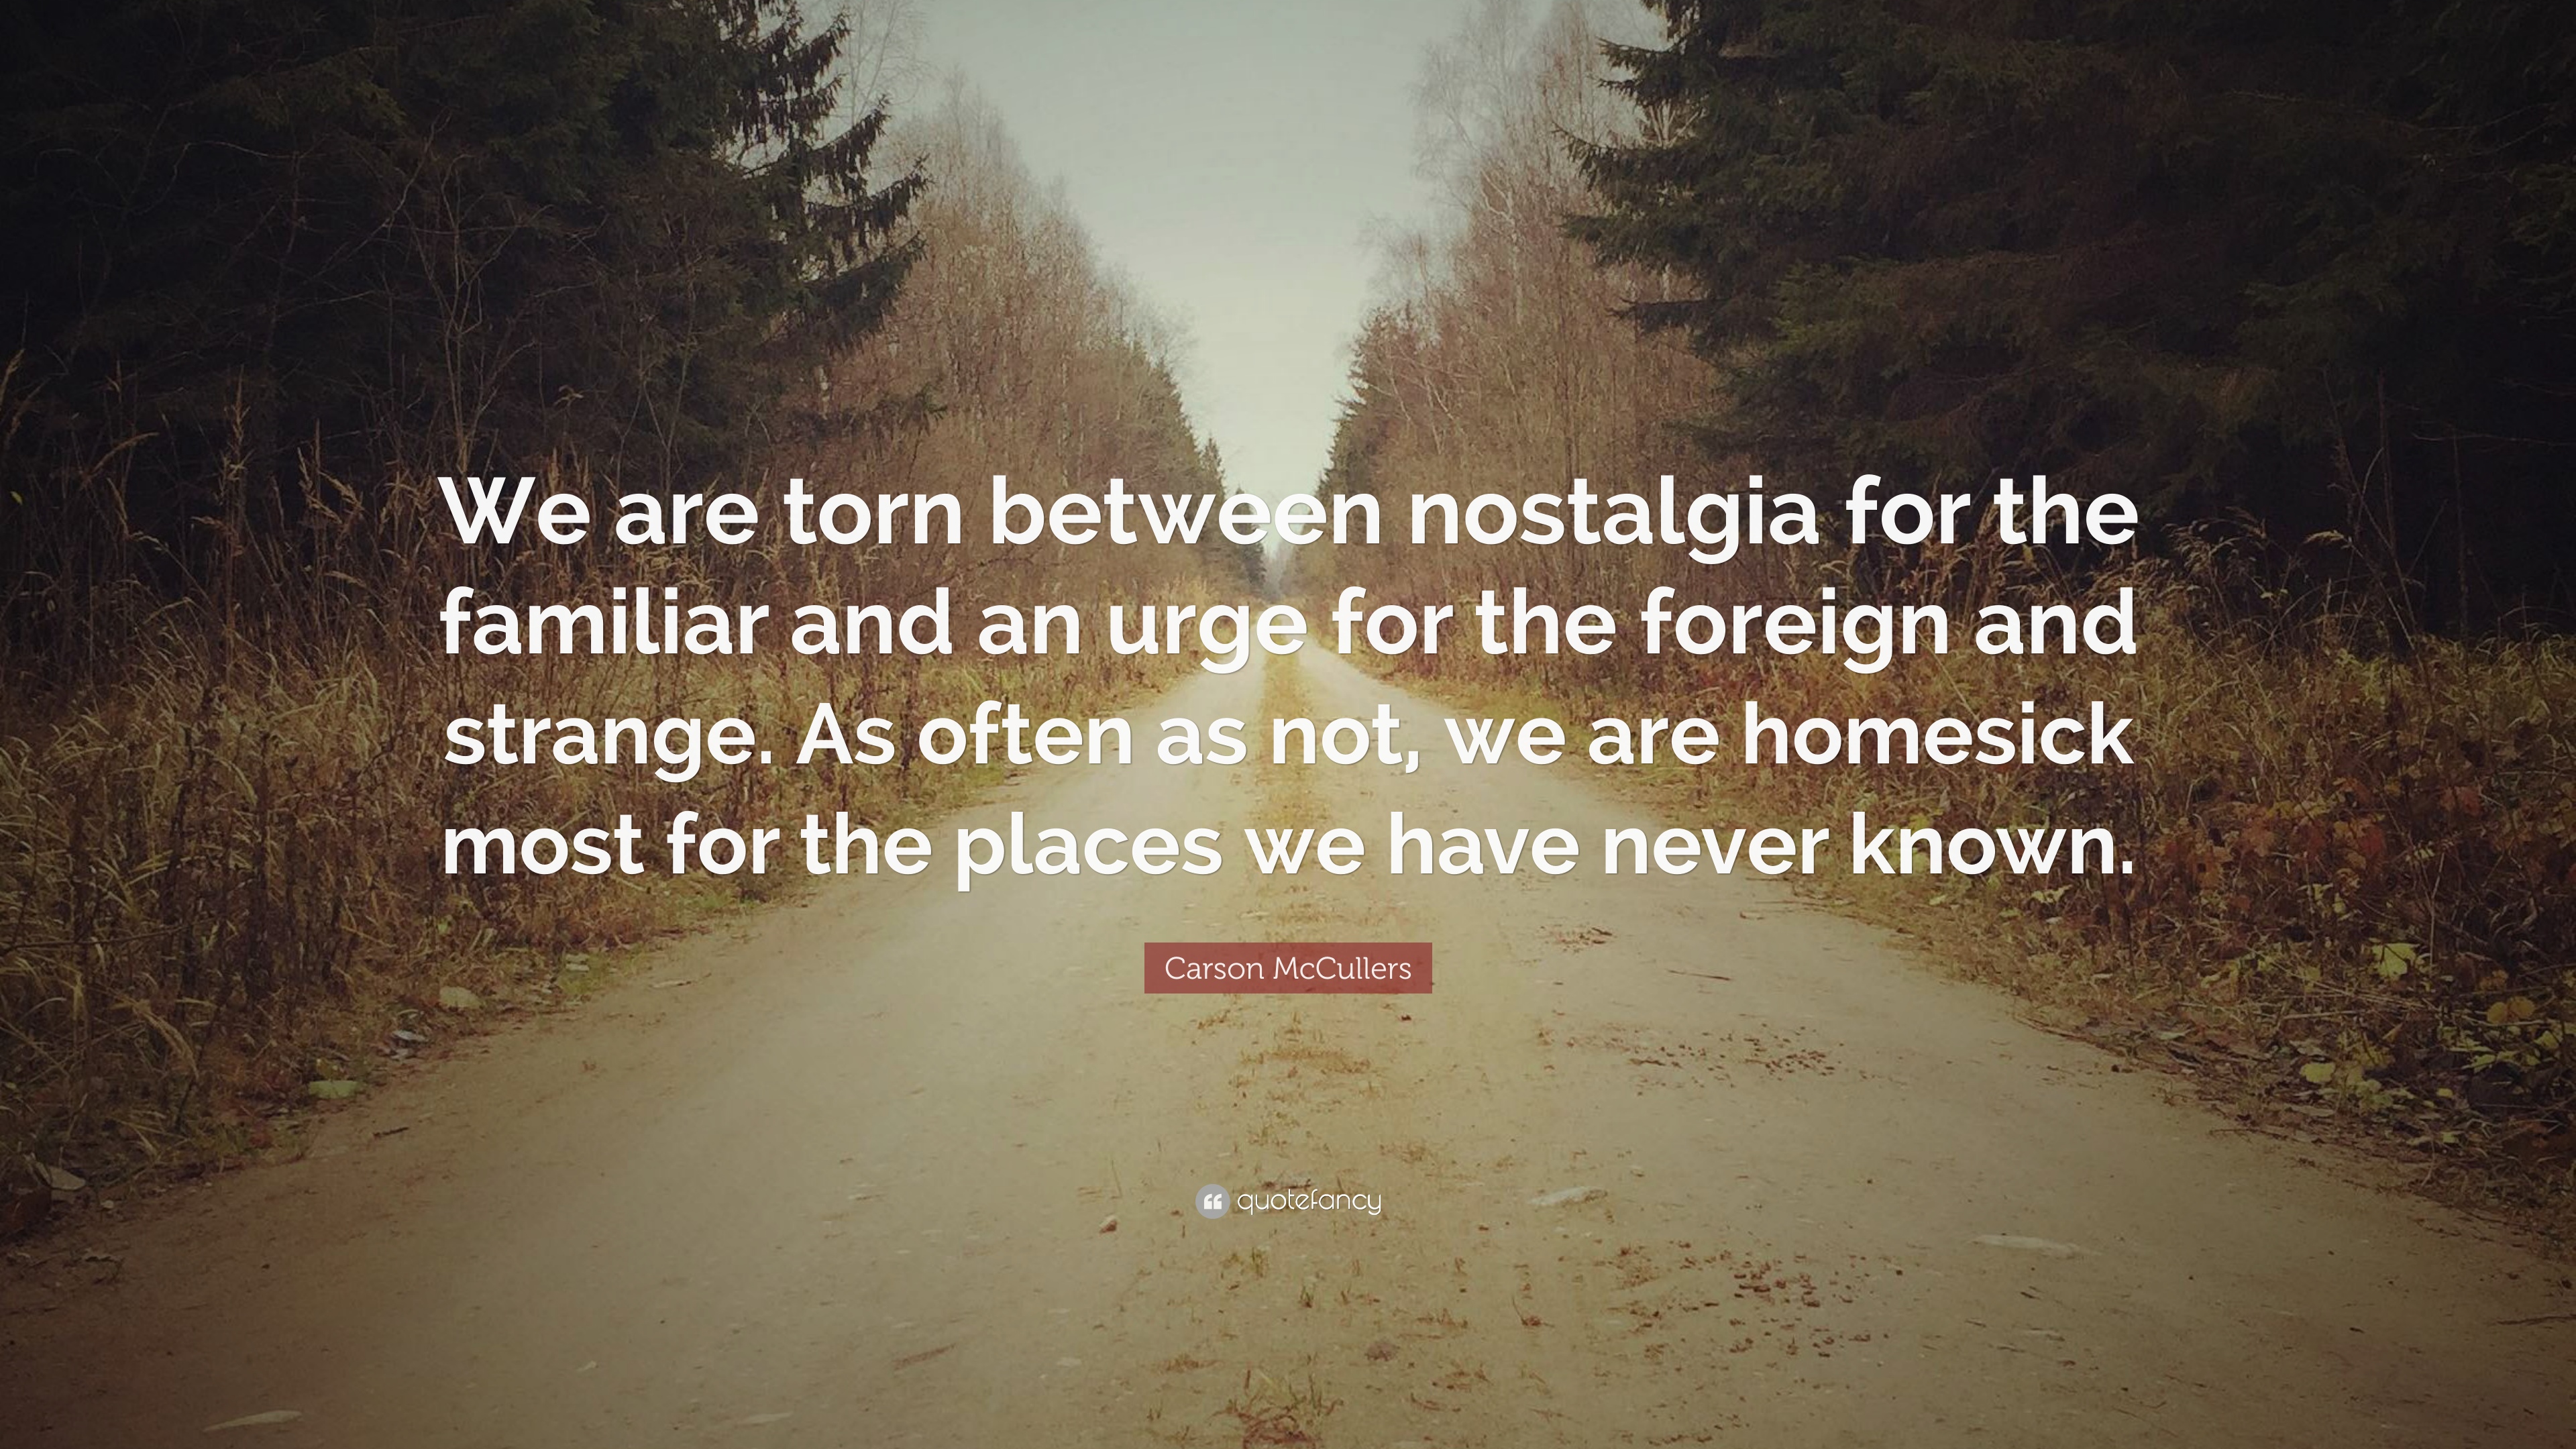 Carson McCullers Quote: “We are torn between nostalgia for the ...